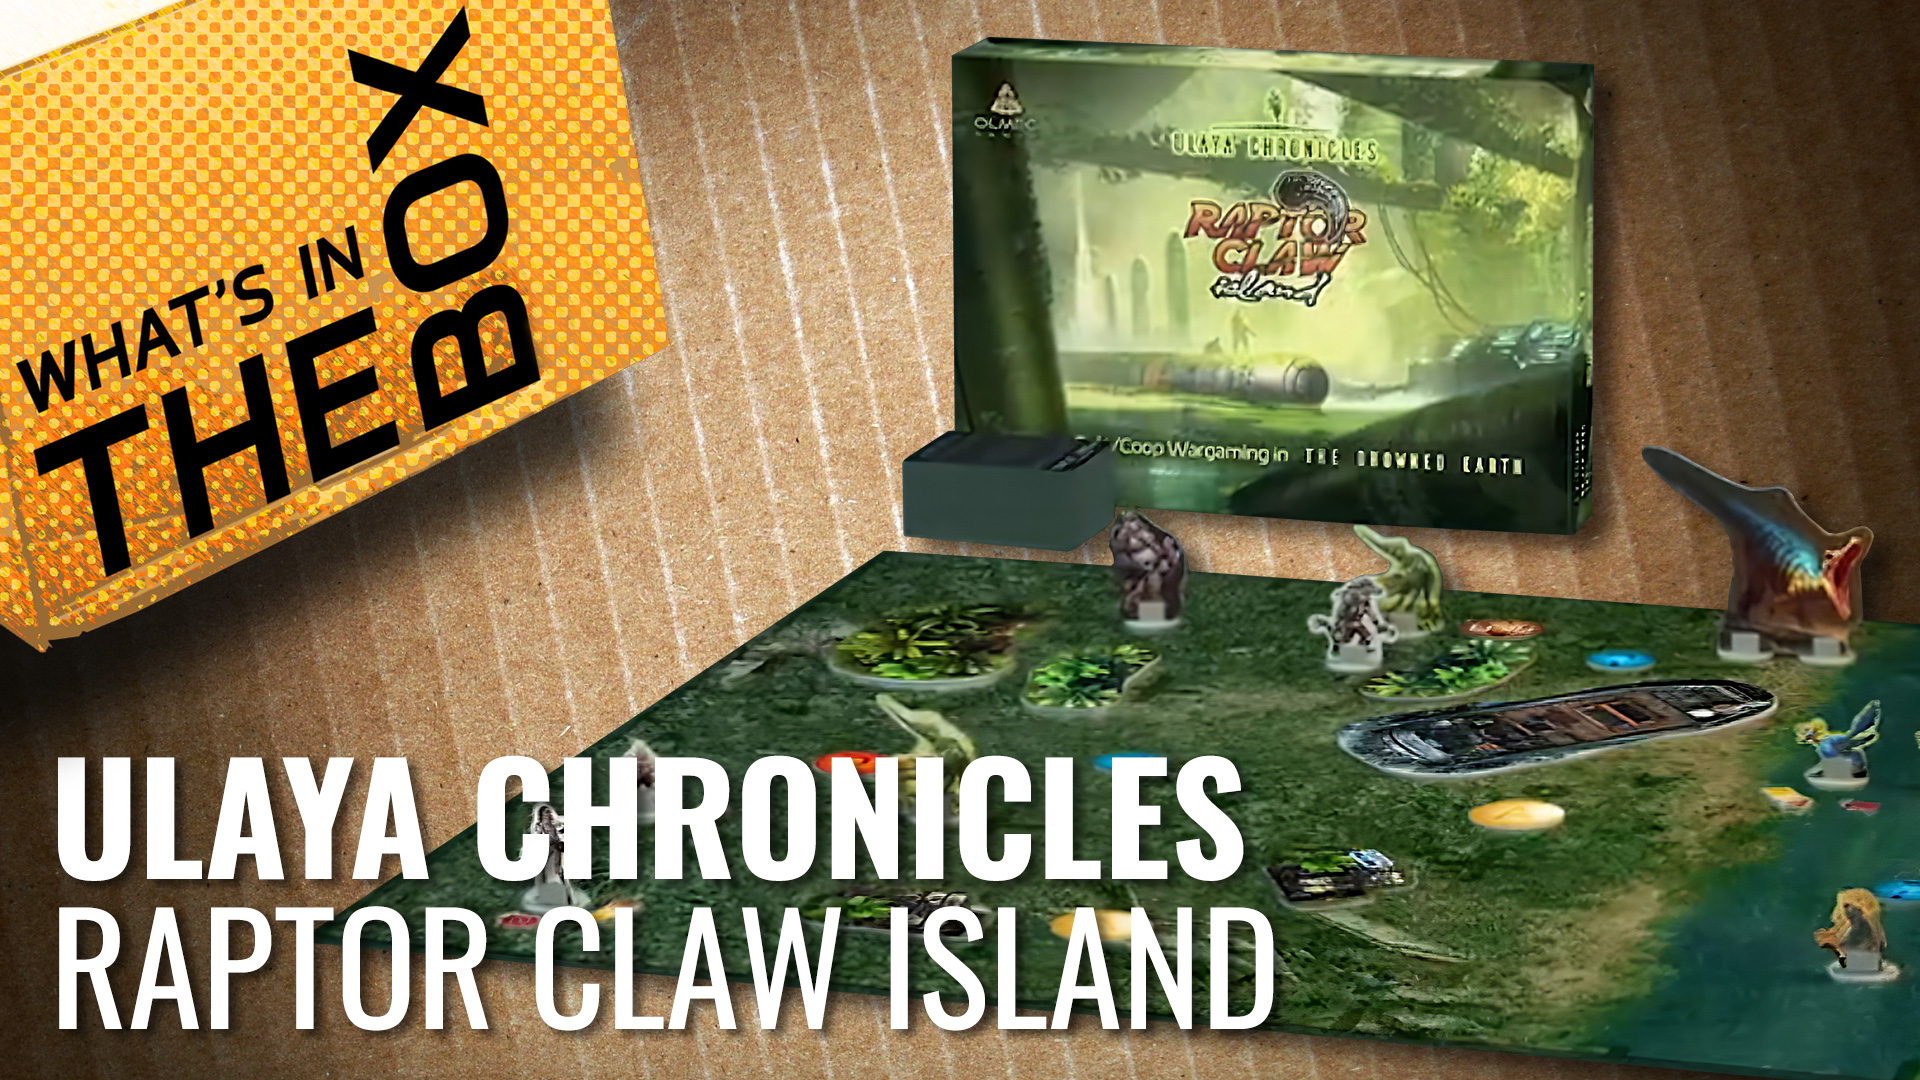 Unboxing---Ulaya-Chronicles-Raptor-Claw-Island-coverimage